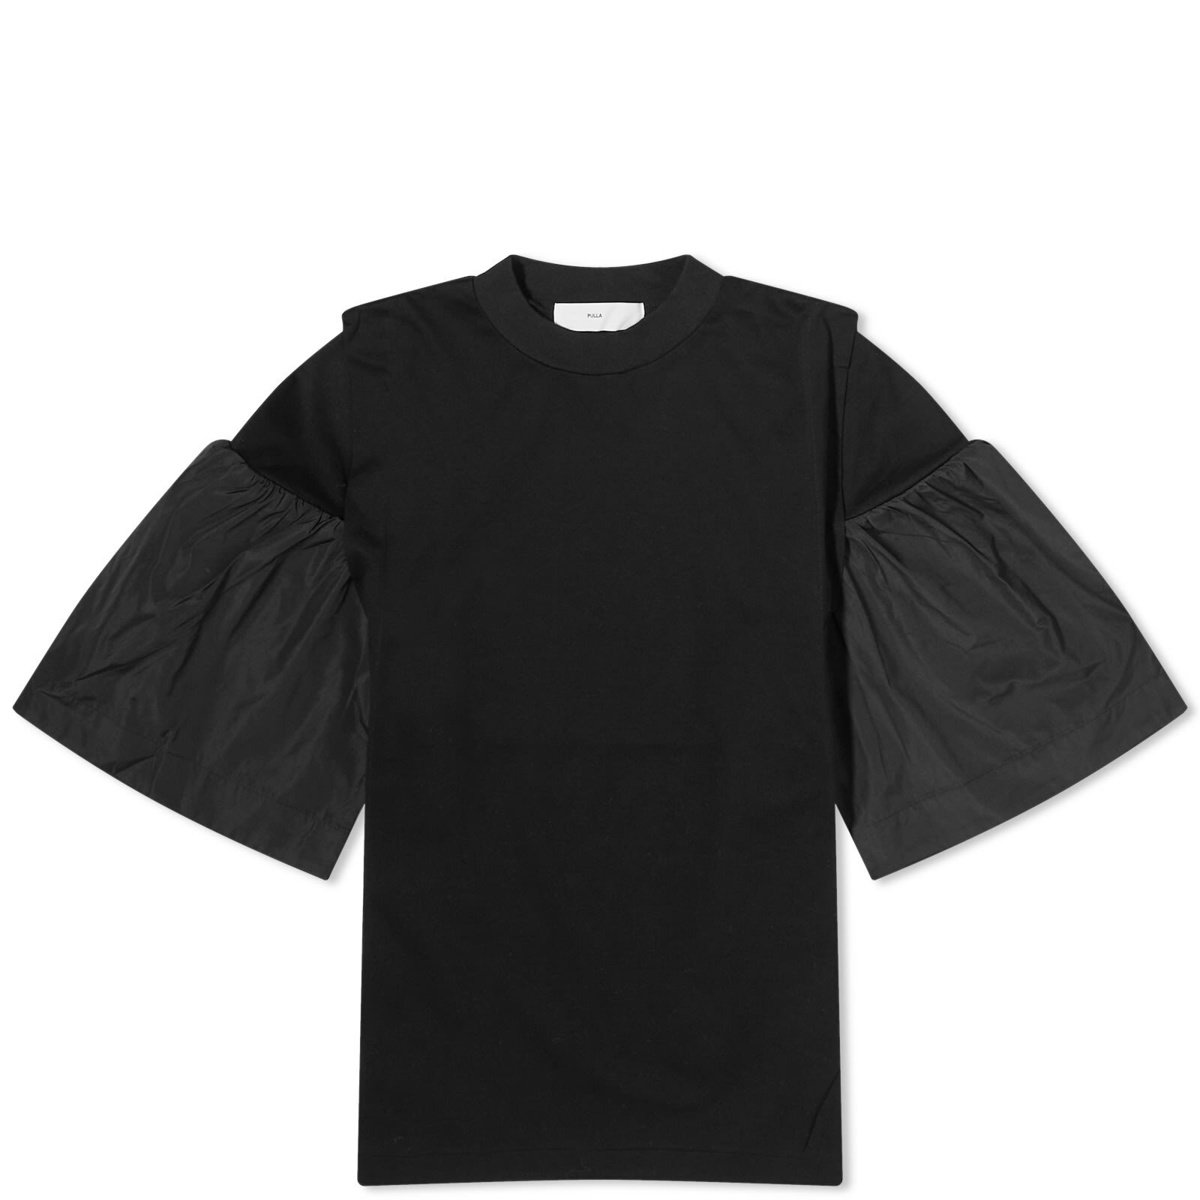 TOGA Women's Cotton Jersey T-Shirt in Black Toga Pulla